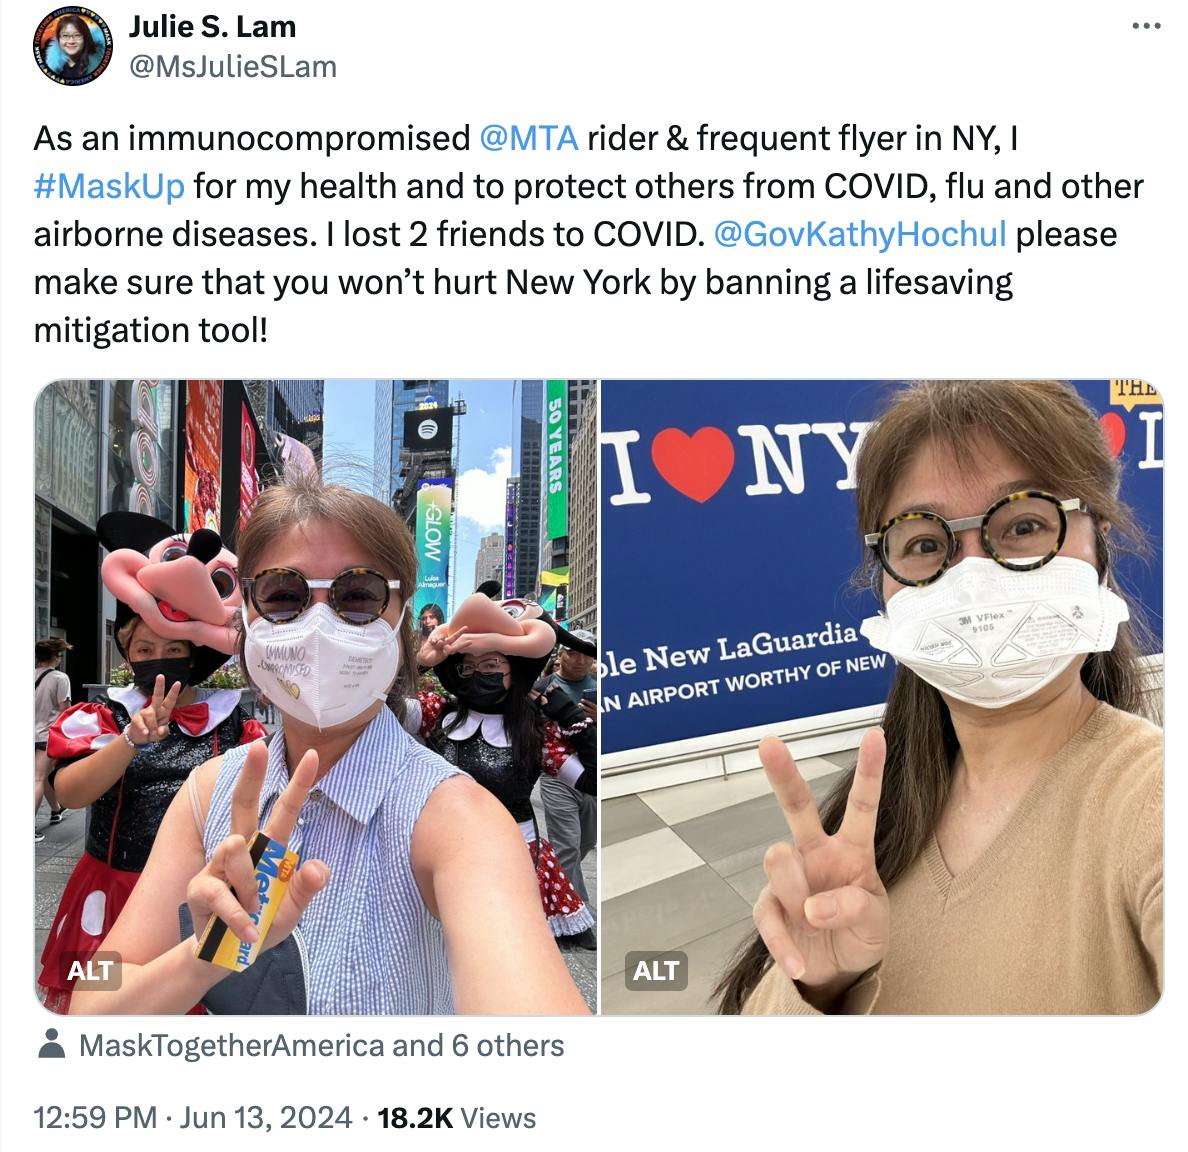 Tweet screenshot Julie S. Lam: TAs an immunocompromised @MTA rider & frequent flyer in NY, I #MaskUp for my health and to protect others from COVID, flu and other airborne diseases. I lost 2 friends to COVID. @GovKathyHochul please make sure that you won’t hurt New York by banning a lifesaving mitigation tool!